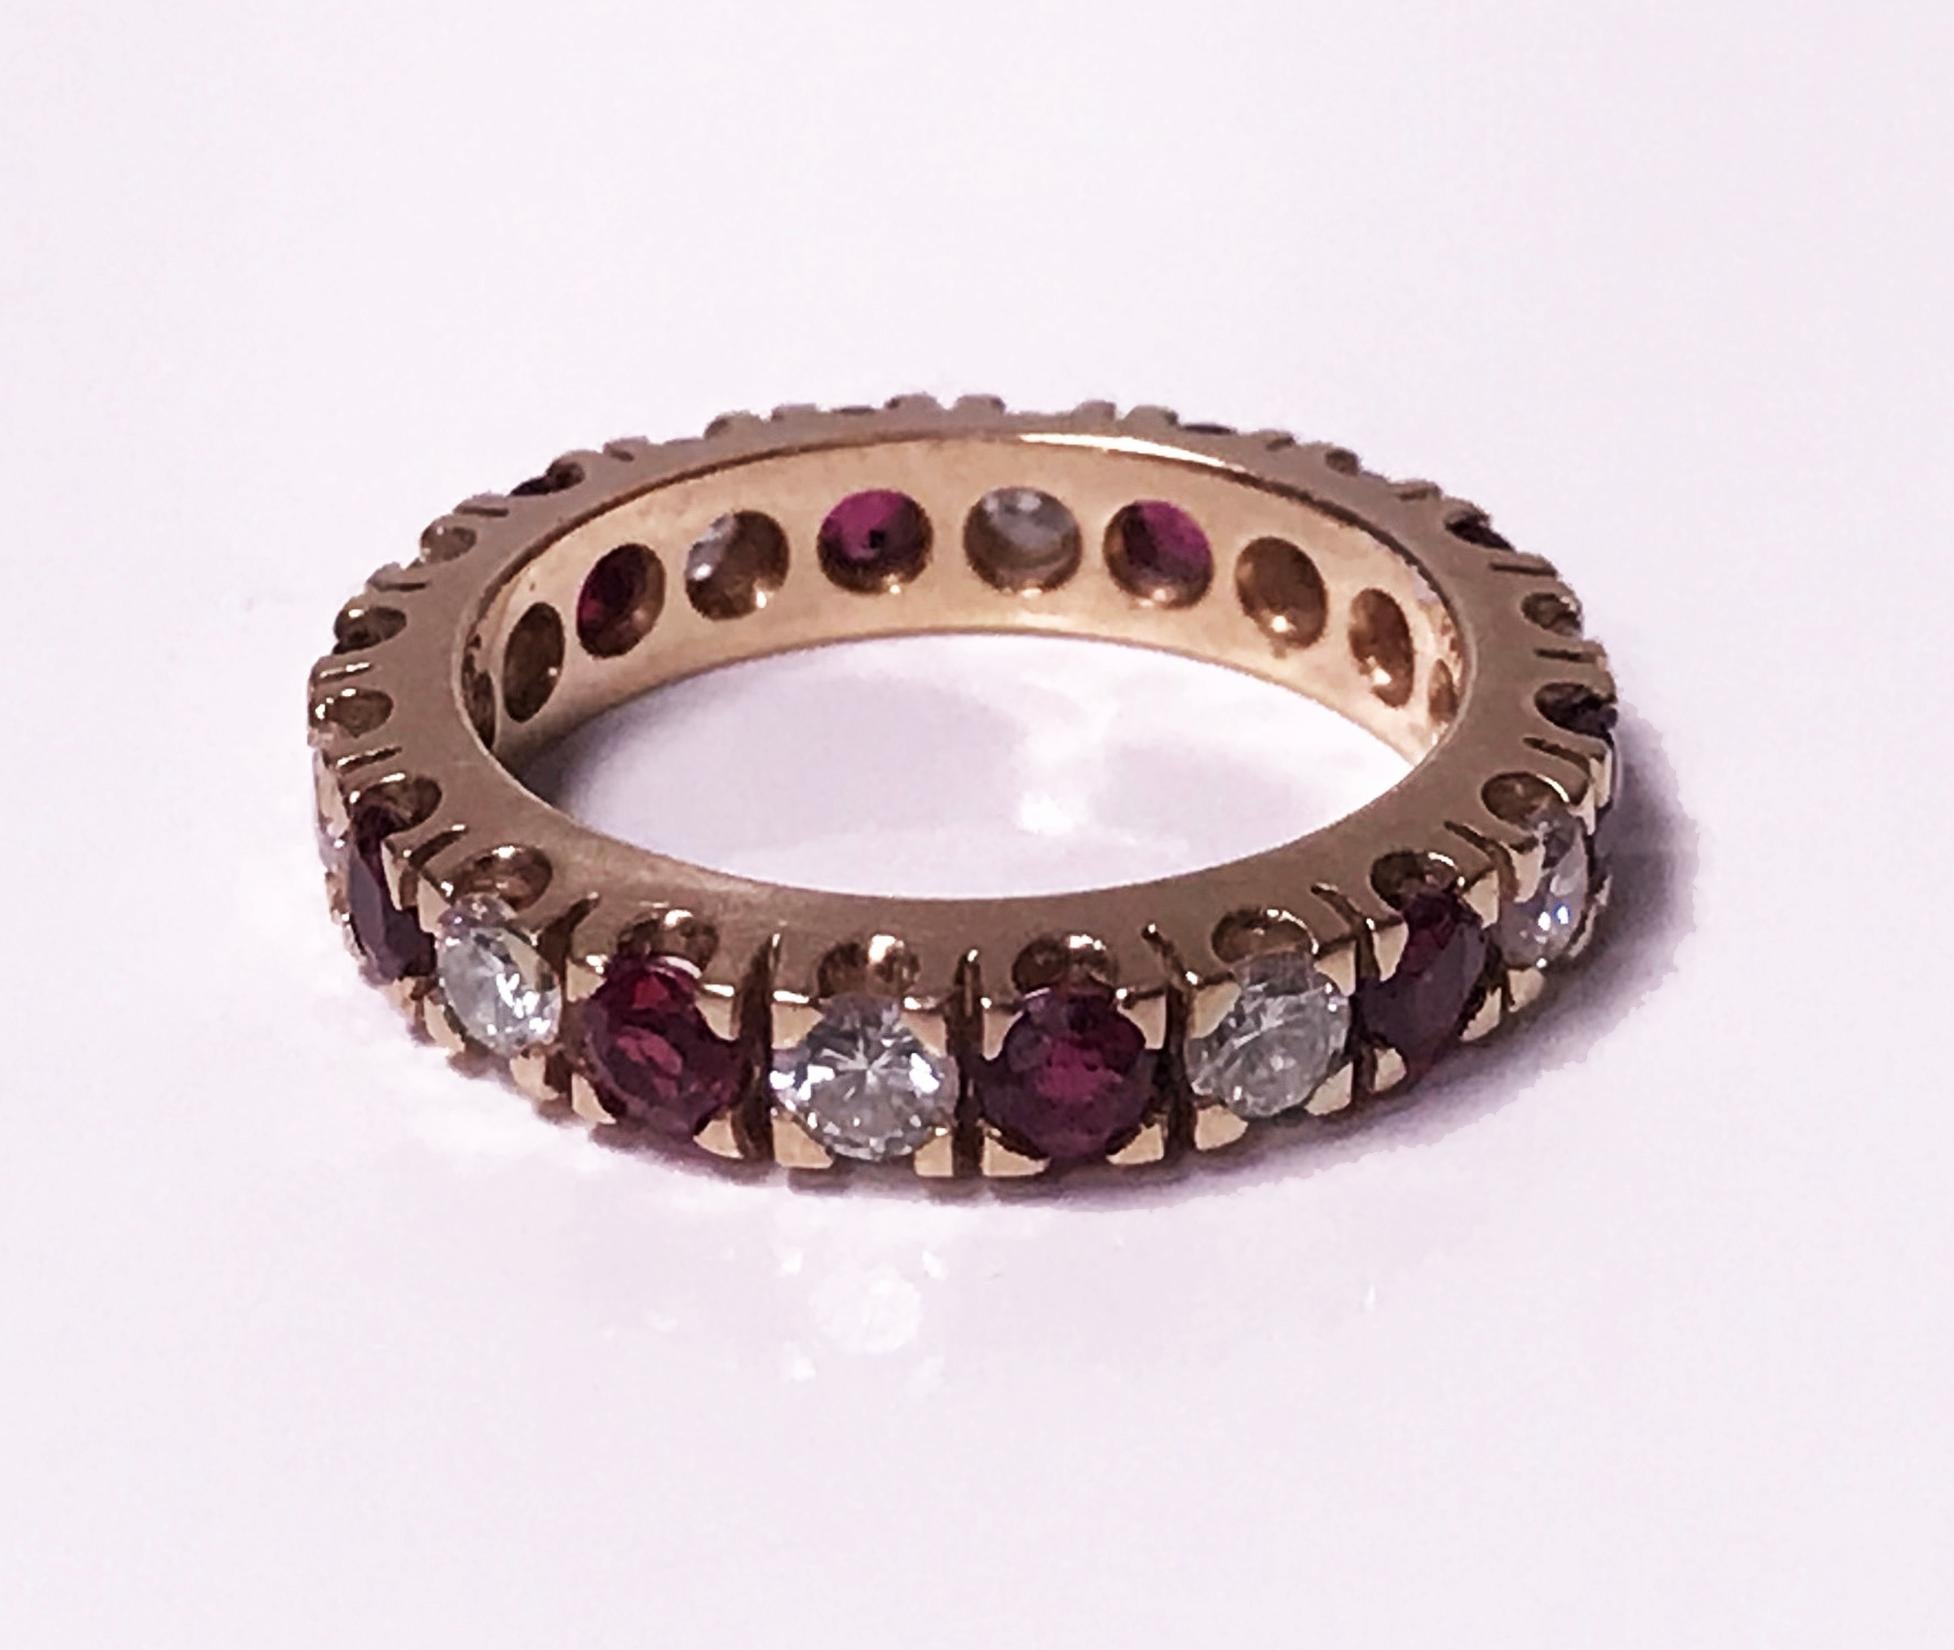 Ruby and Diamond Eternity Ring 14Kyellow gold. The ring set with 10 round brilliant cut diamonds, total diamond weight approximately 0.73 ct, average VS2-SI1 clarity, average H colour and ten medium moderately strong purplish Red Rubies, total ruby